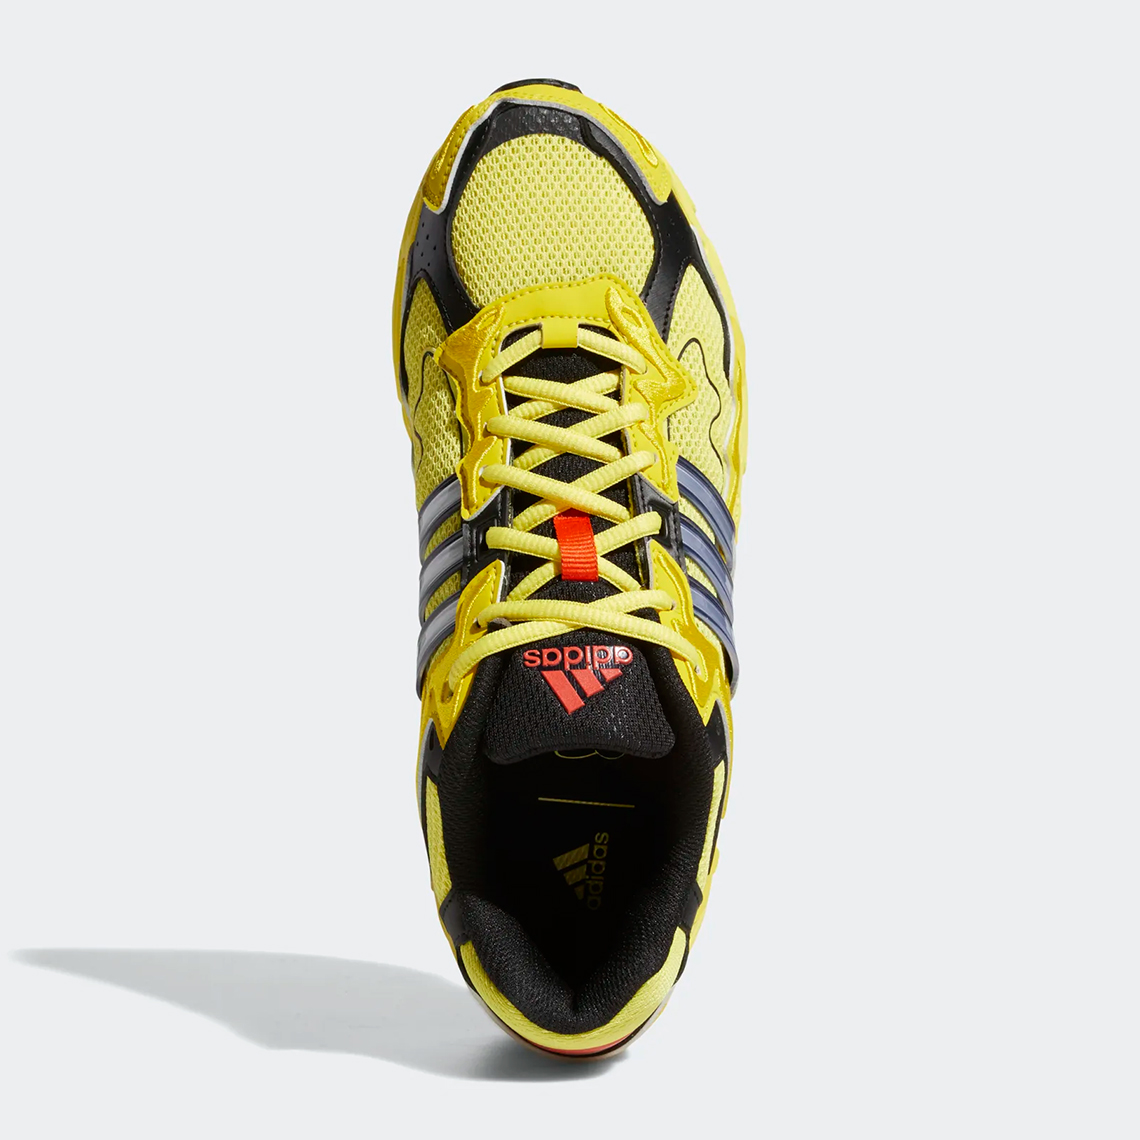 adidas response cl bad bunny yellow gy0101 release date 3